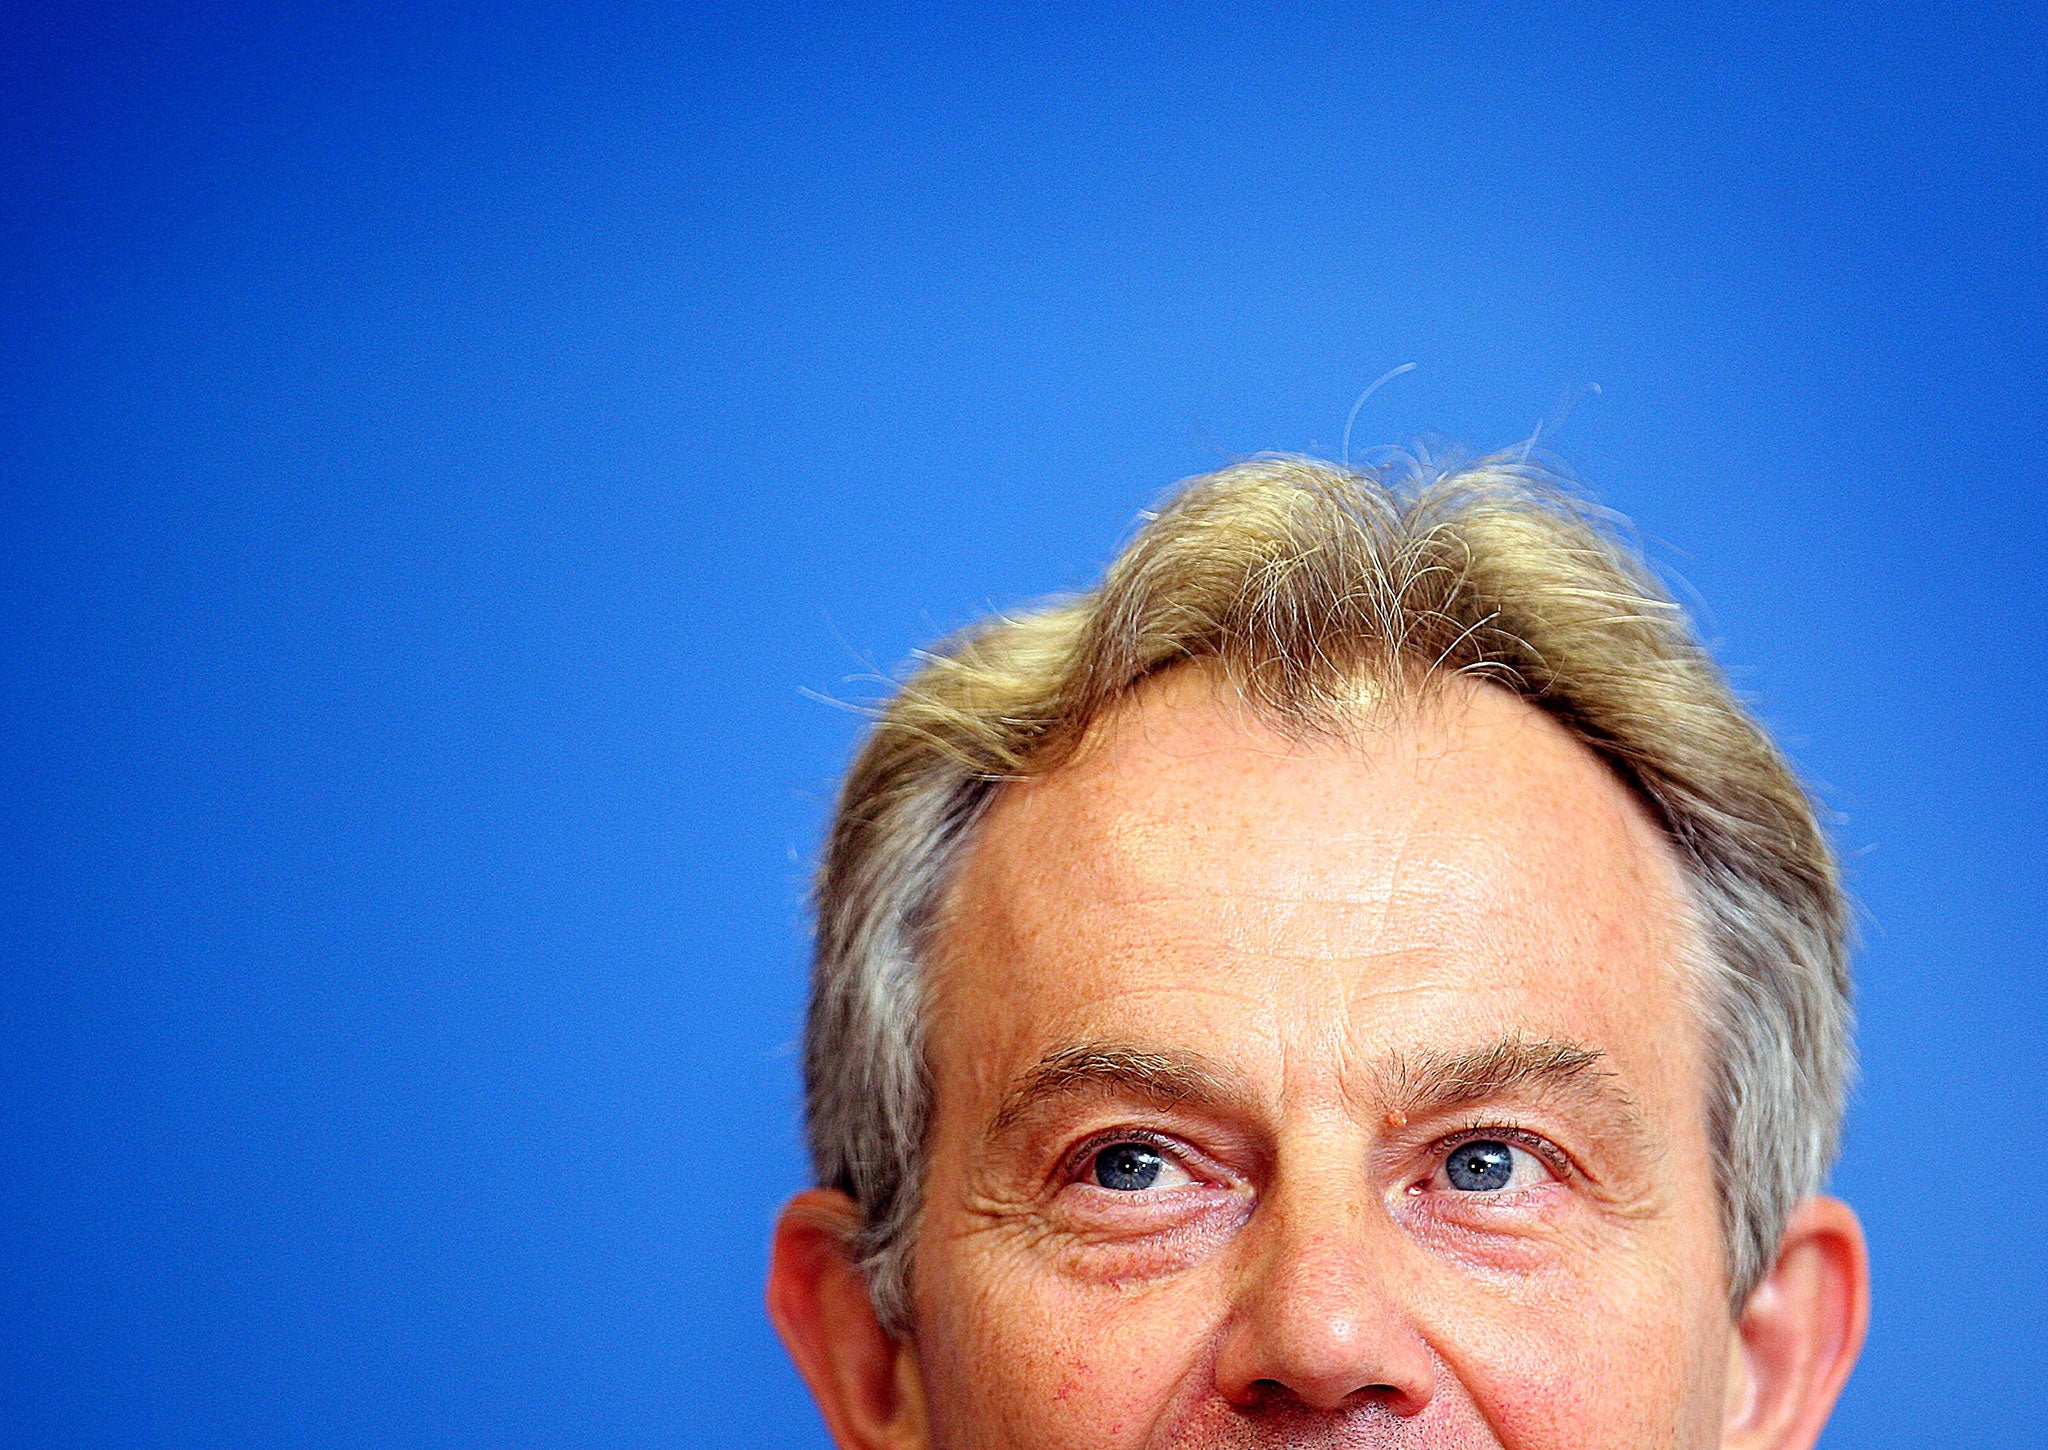 Tony Blair has been named top gay icon of the last 30 years by the Gay Times